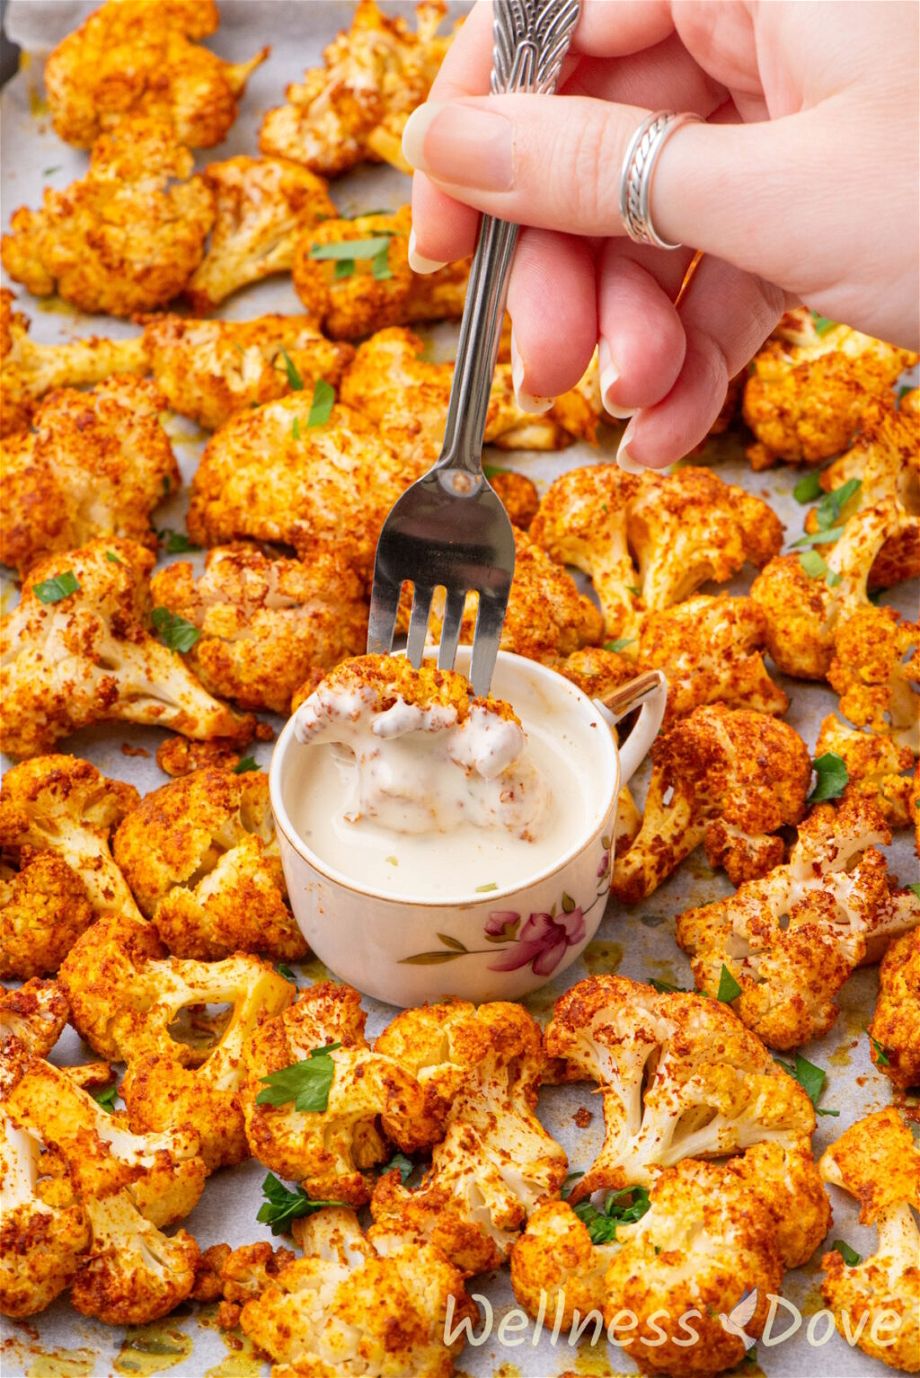 the Oil-free Oven Roasted Cauliflower on a baking tray and a hand is dipping a cauliflower in a cup of sauce